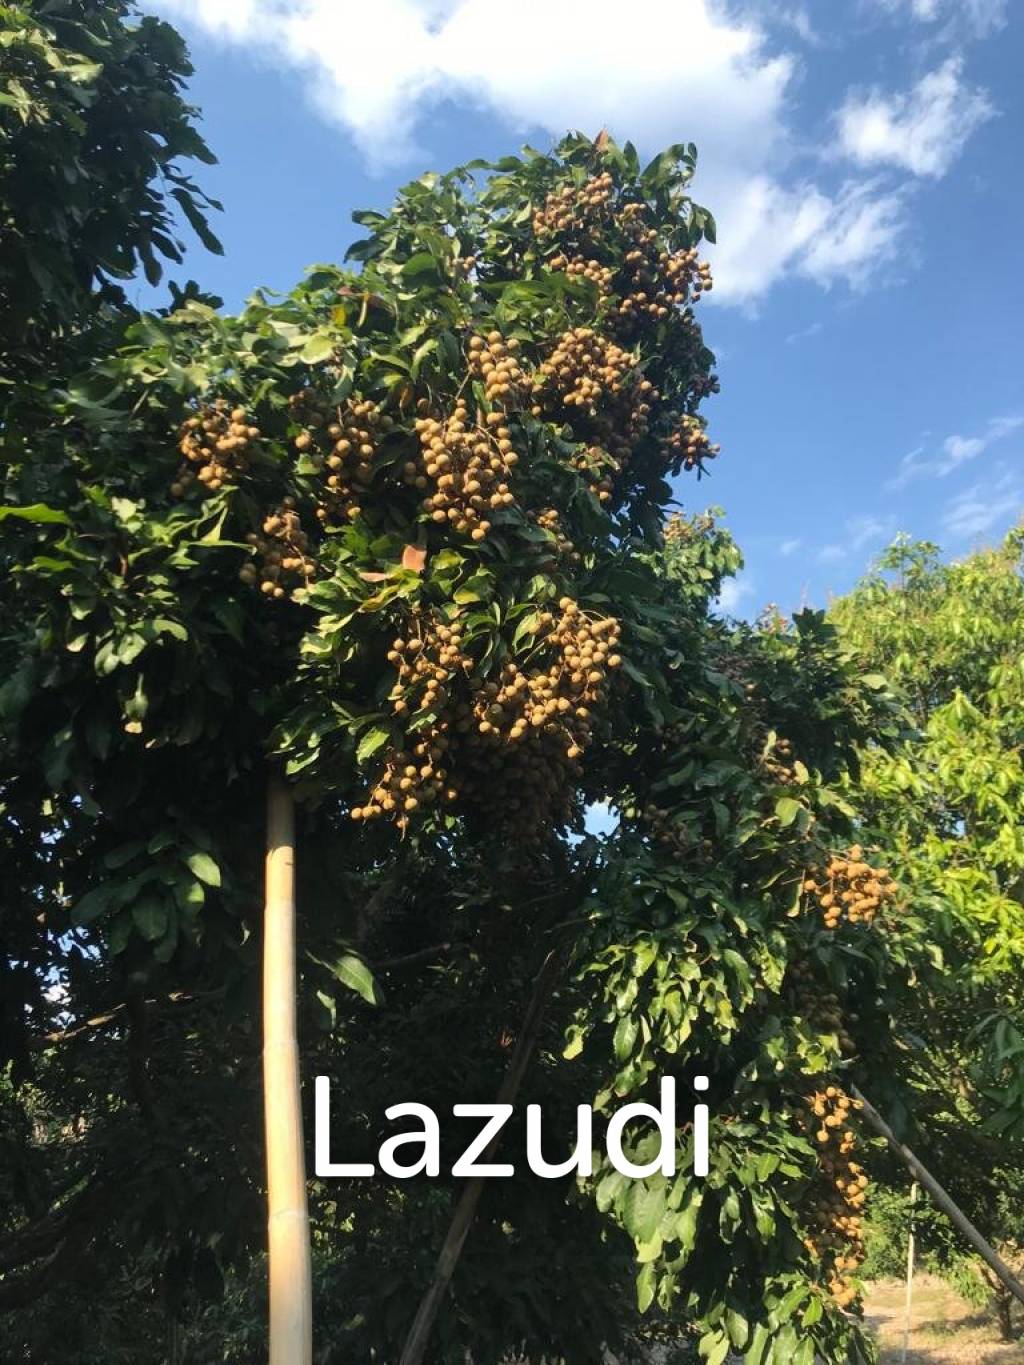 Land with fully grown Longan and Mango trees